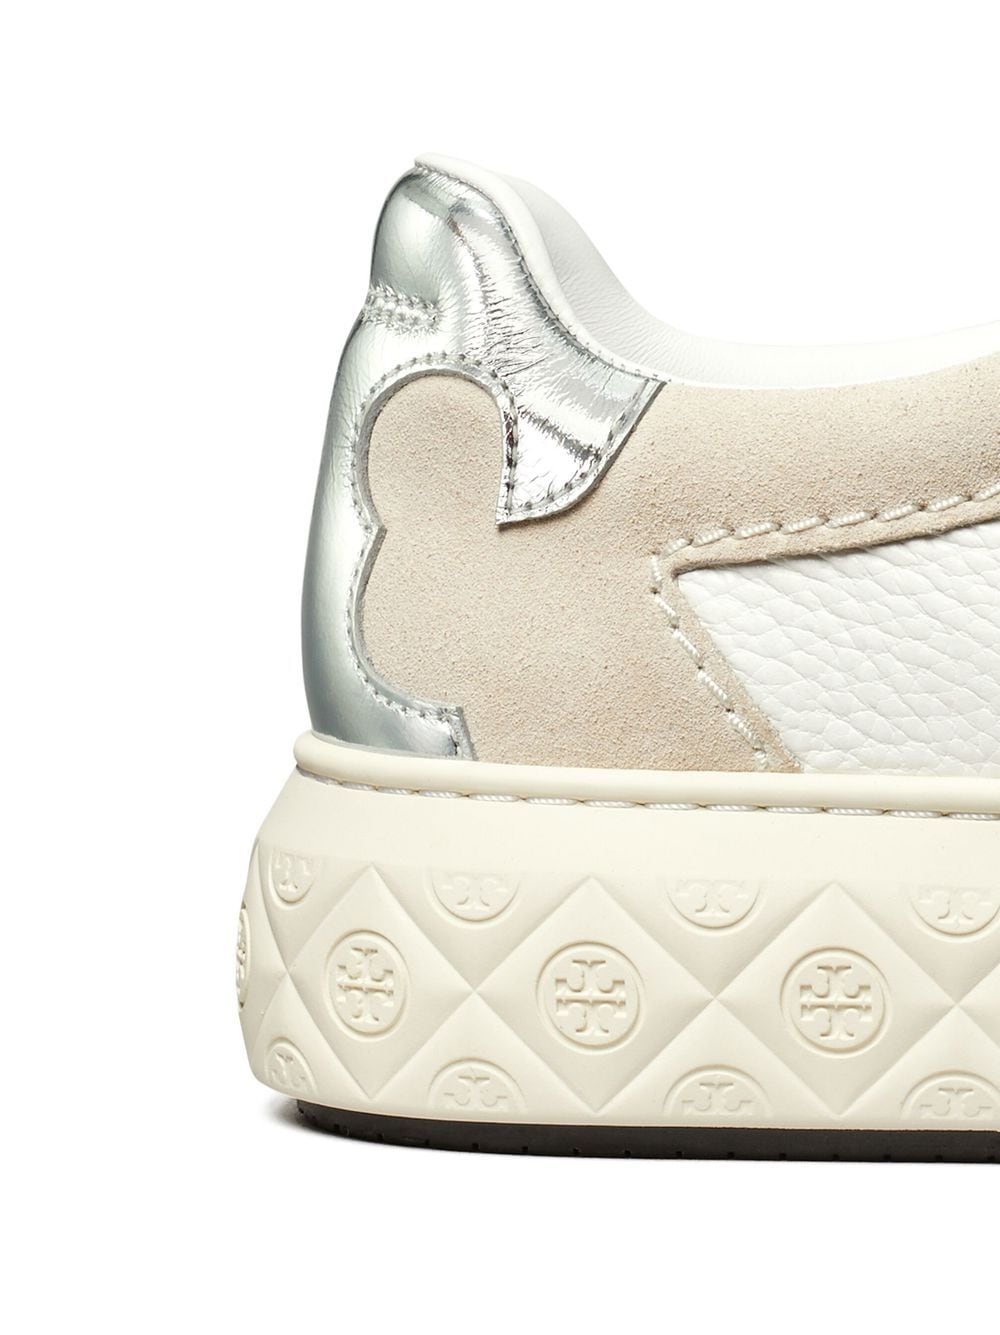 Tory Burch Ladubyg Low-top Sneakers In White/light Grey/silver | ModeSens